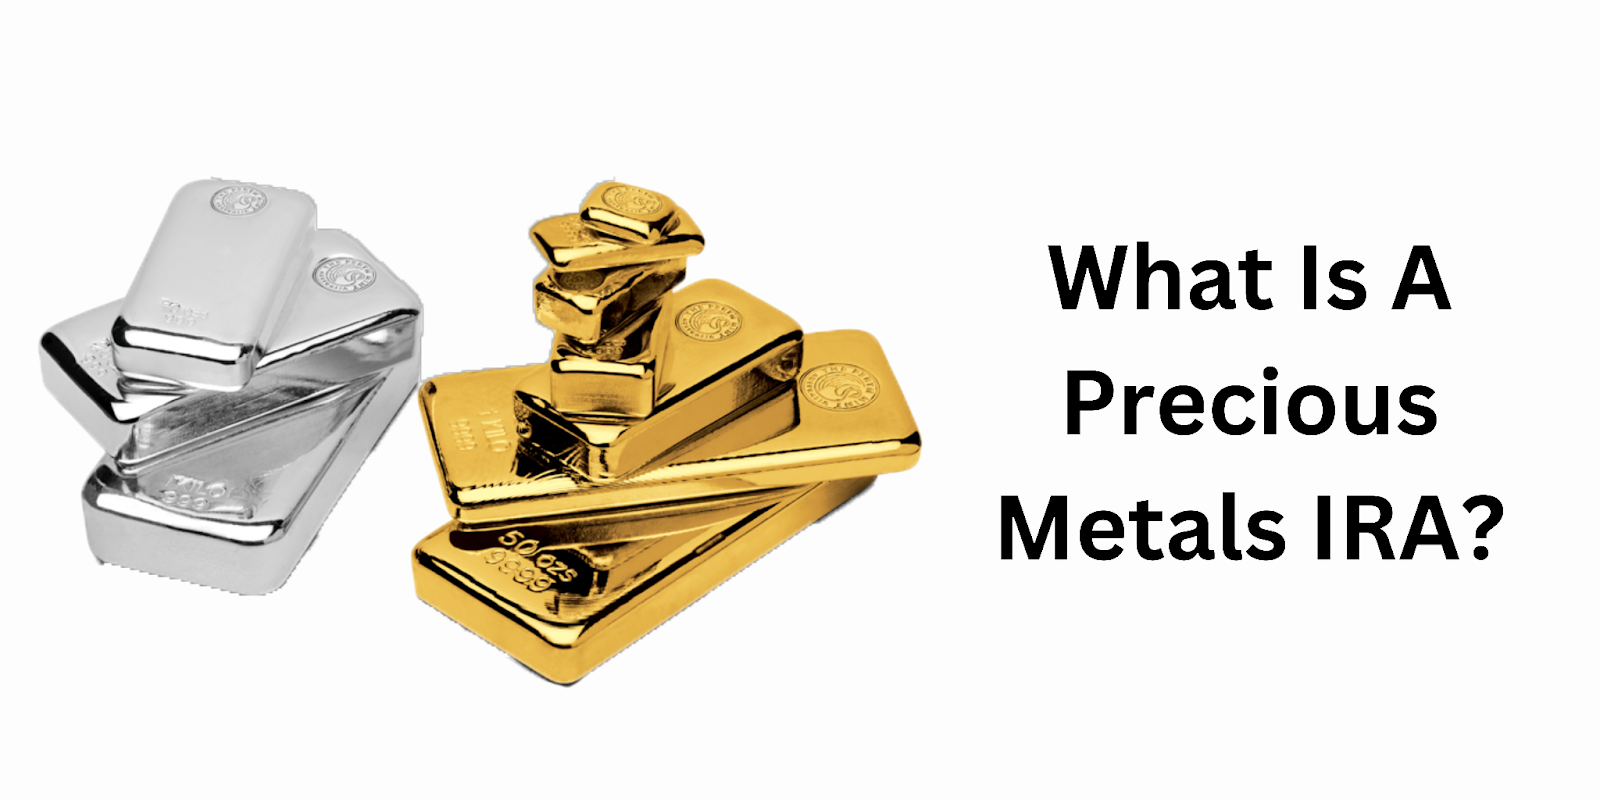 IRA Gold And Silver: What You Need To Know About Precious Metals IRA